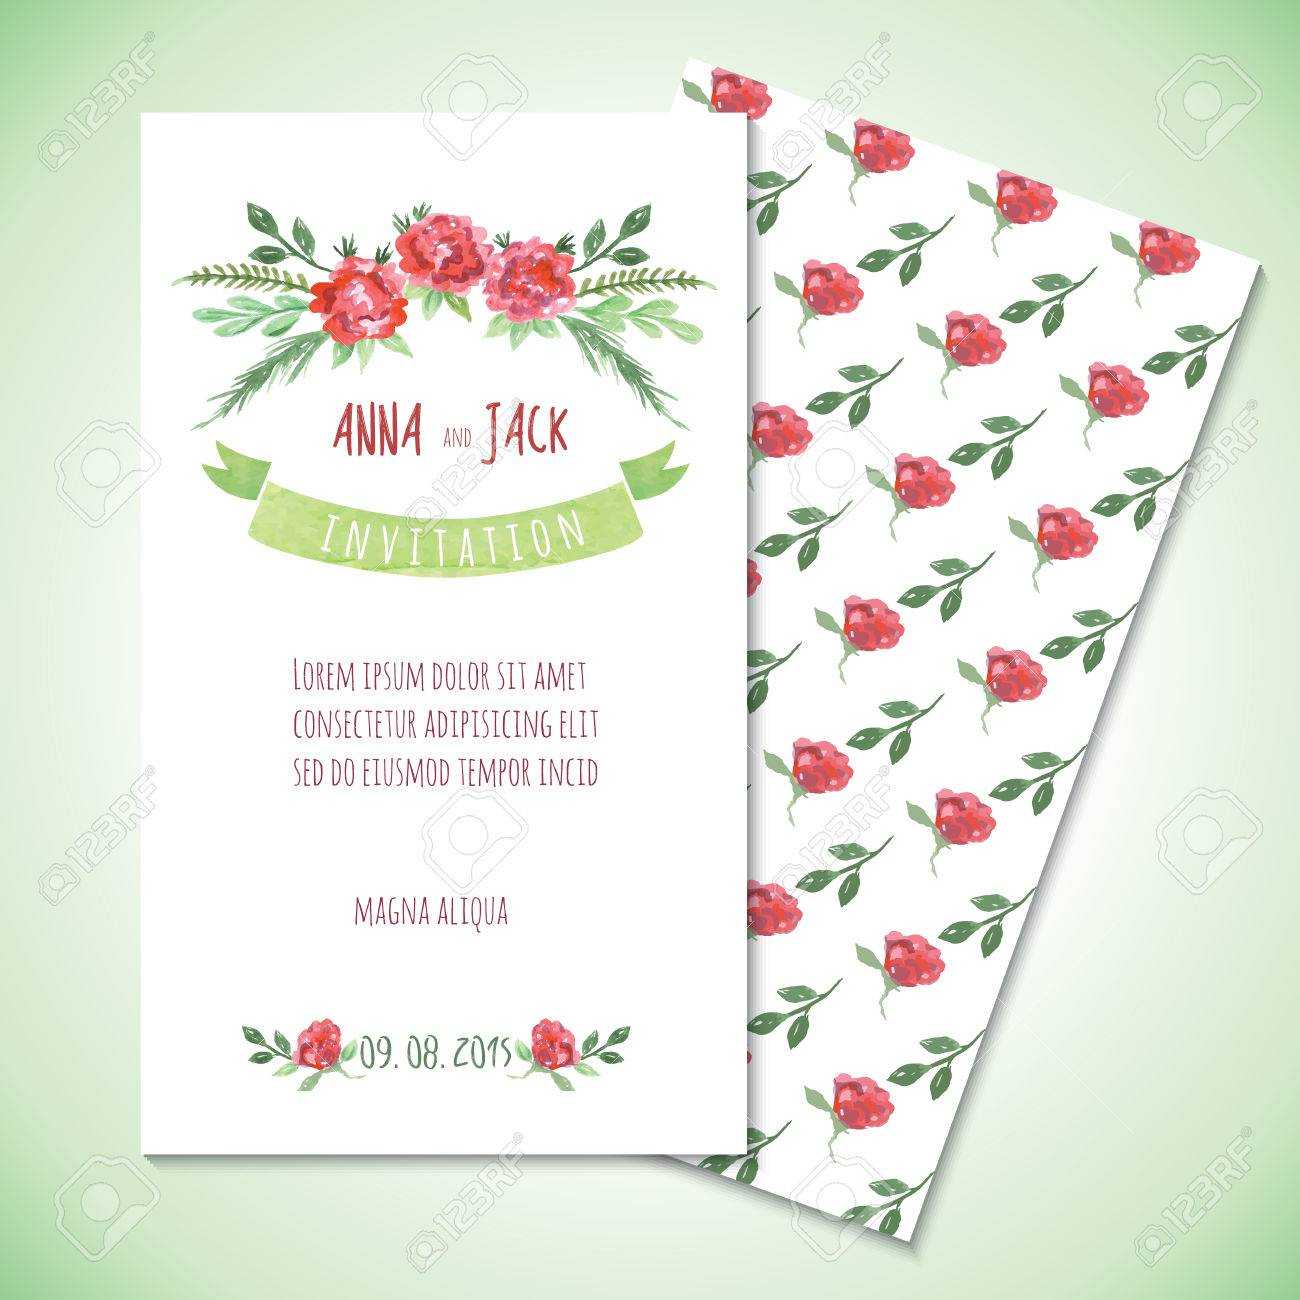 Watercolor Card Templates For Wedding Invitation, Save The Date Cards,  Mothers Day, Valentines Day, Birthday Cards With Flowers And Ribbon And Regarding Save The Date Cards Templates